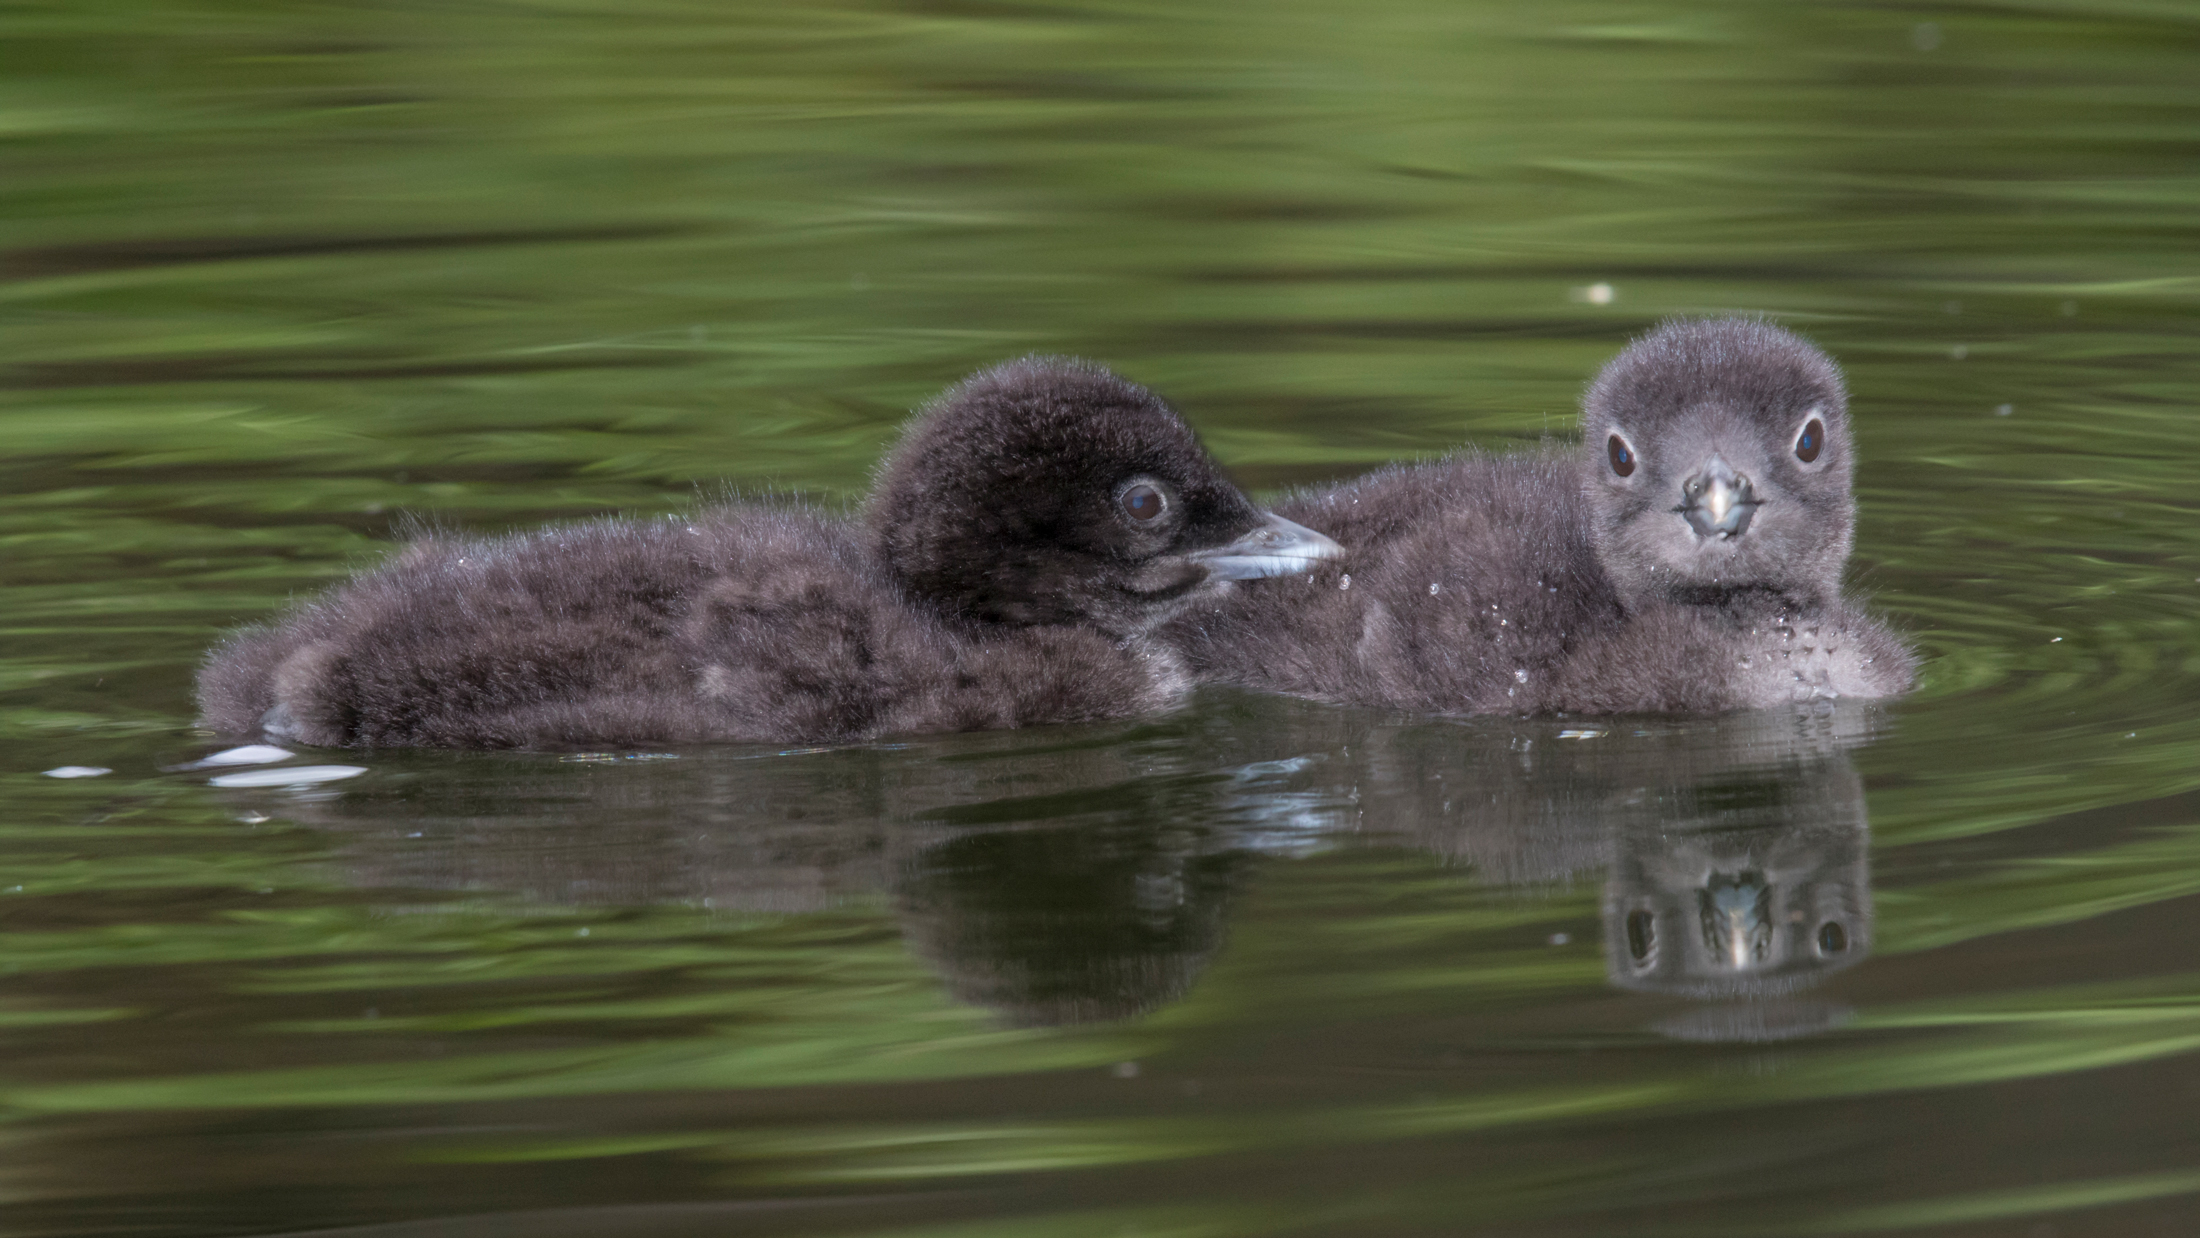 These three-day-old Common Loon chicks huddle together while their parents are underwater searching for food for them. At this age, the chicks are too small to ingest fish, so their parents bring them smaller food, such as dragonfly nymphs, snails and small leaches. Photo © Daniel and Ginger Poleschook